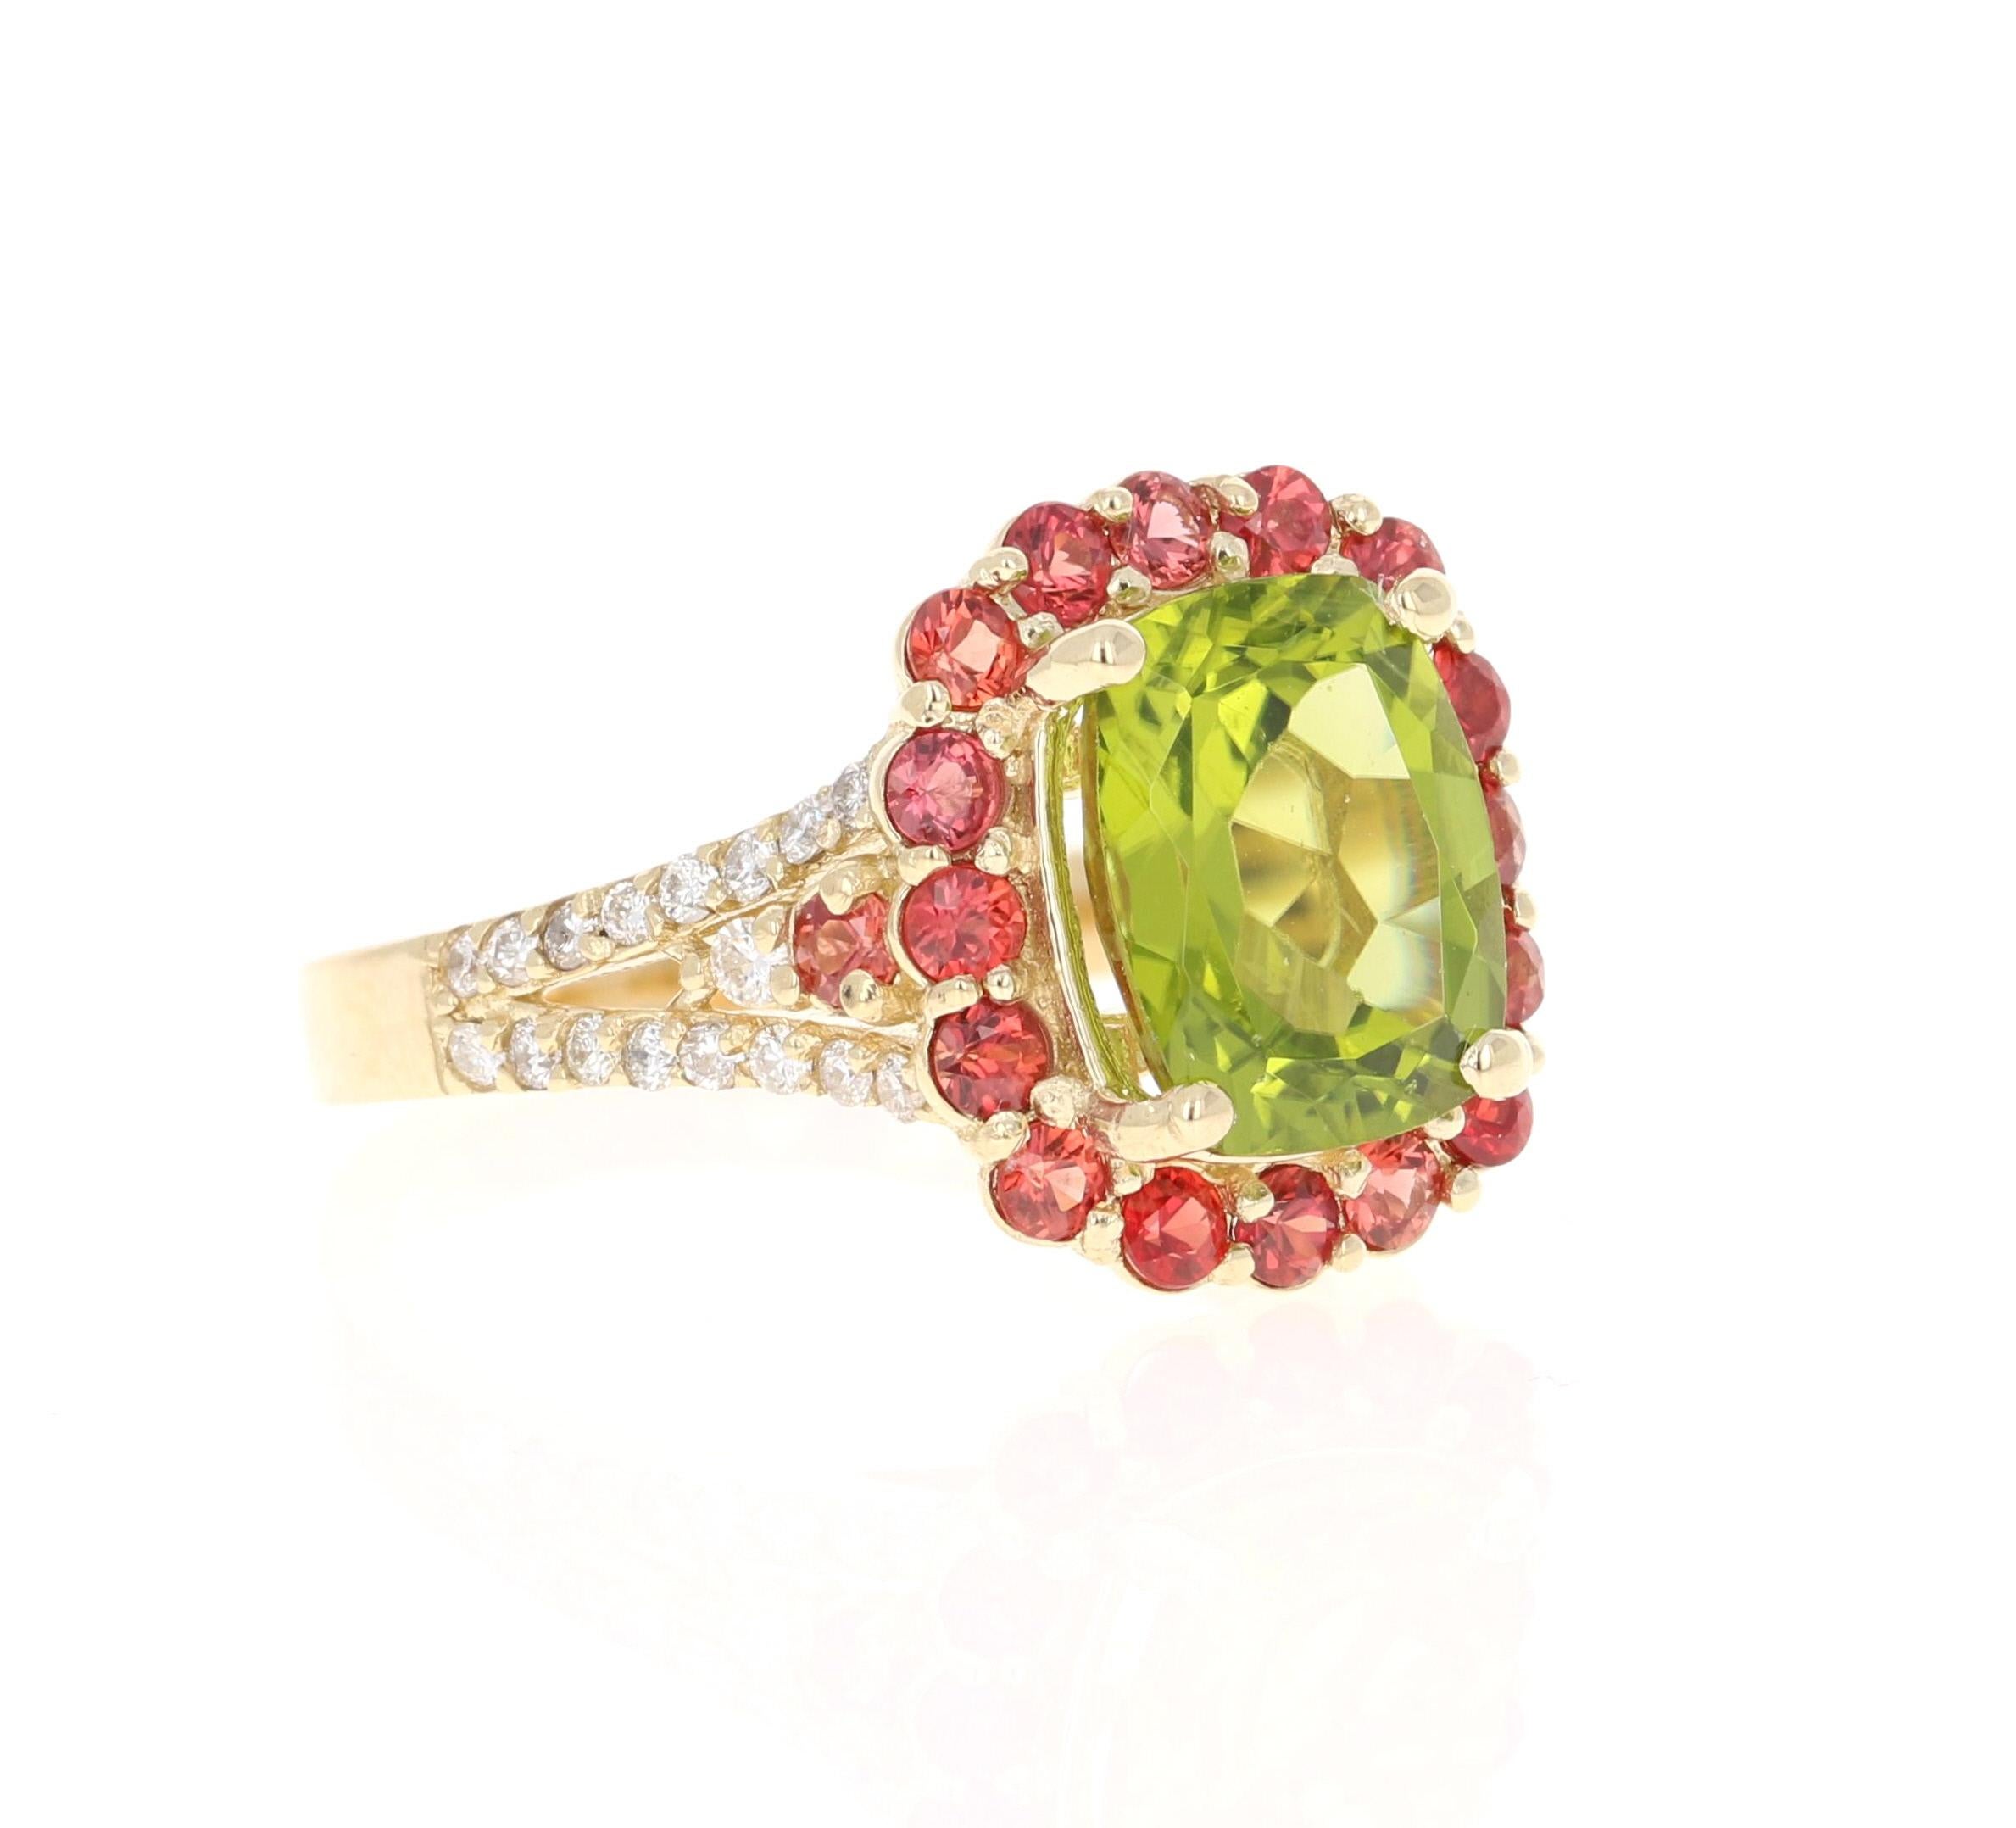 4.57 Carat Oval Cut Peridot Sapphire Diamond 14 Karat Yellow Gold Ring

This beautiful ring has an Cushion/Oval Cut Peridot that weighs 3.36 Carats. The ring is surrounded by 18 Red Sapphires that weigh 0.90 Carats and 34 Round Cut Diamonds that